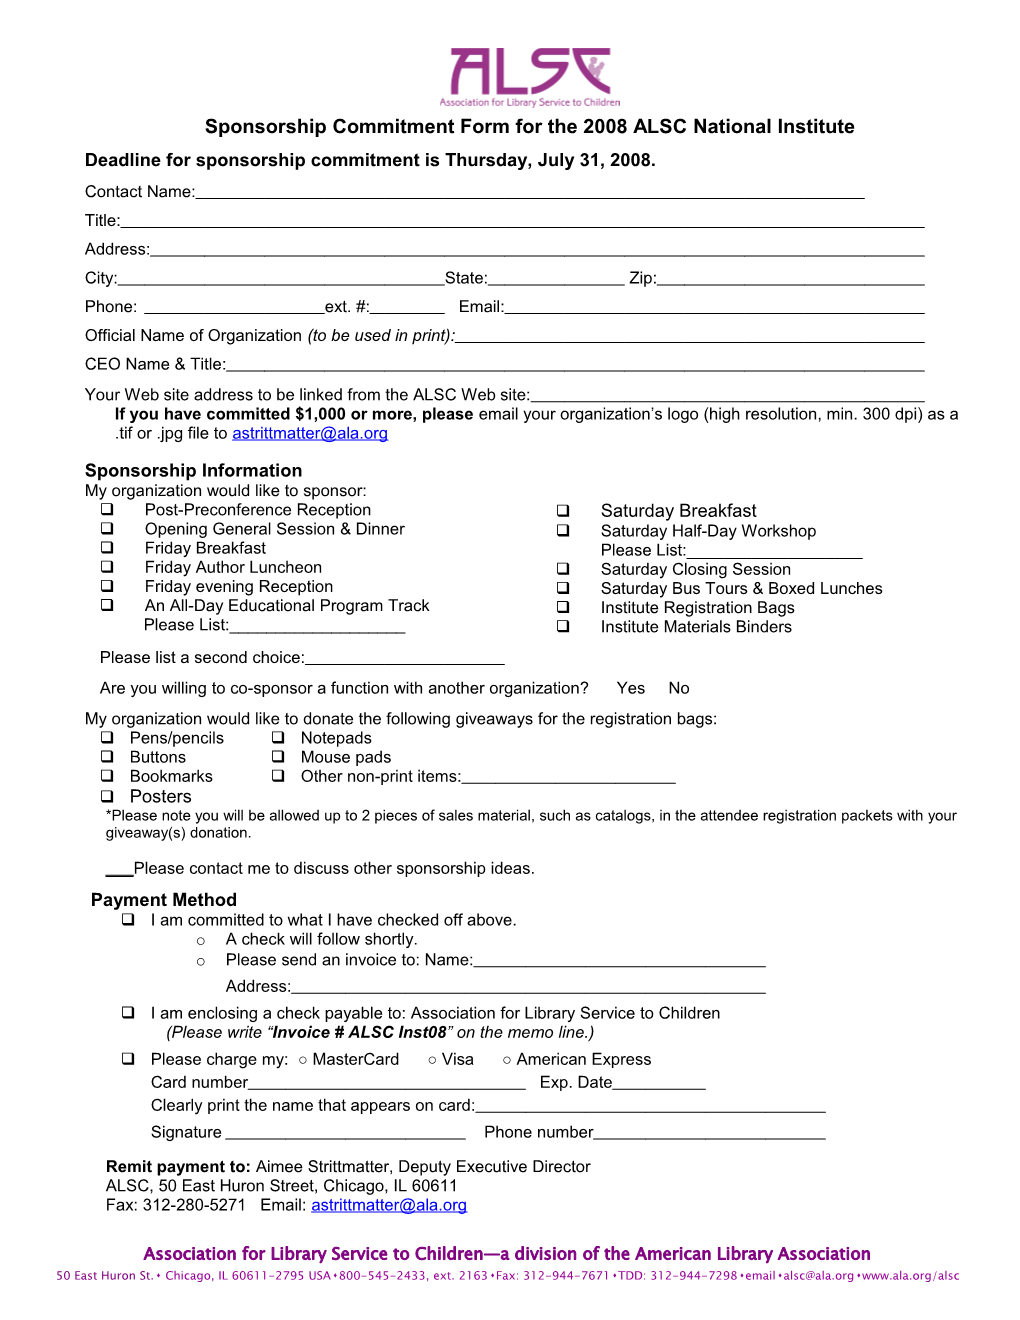 Sponsorship Commitment Form for the 2006 ALSC Institute